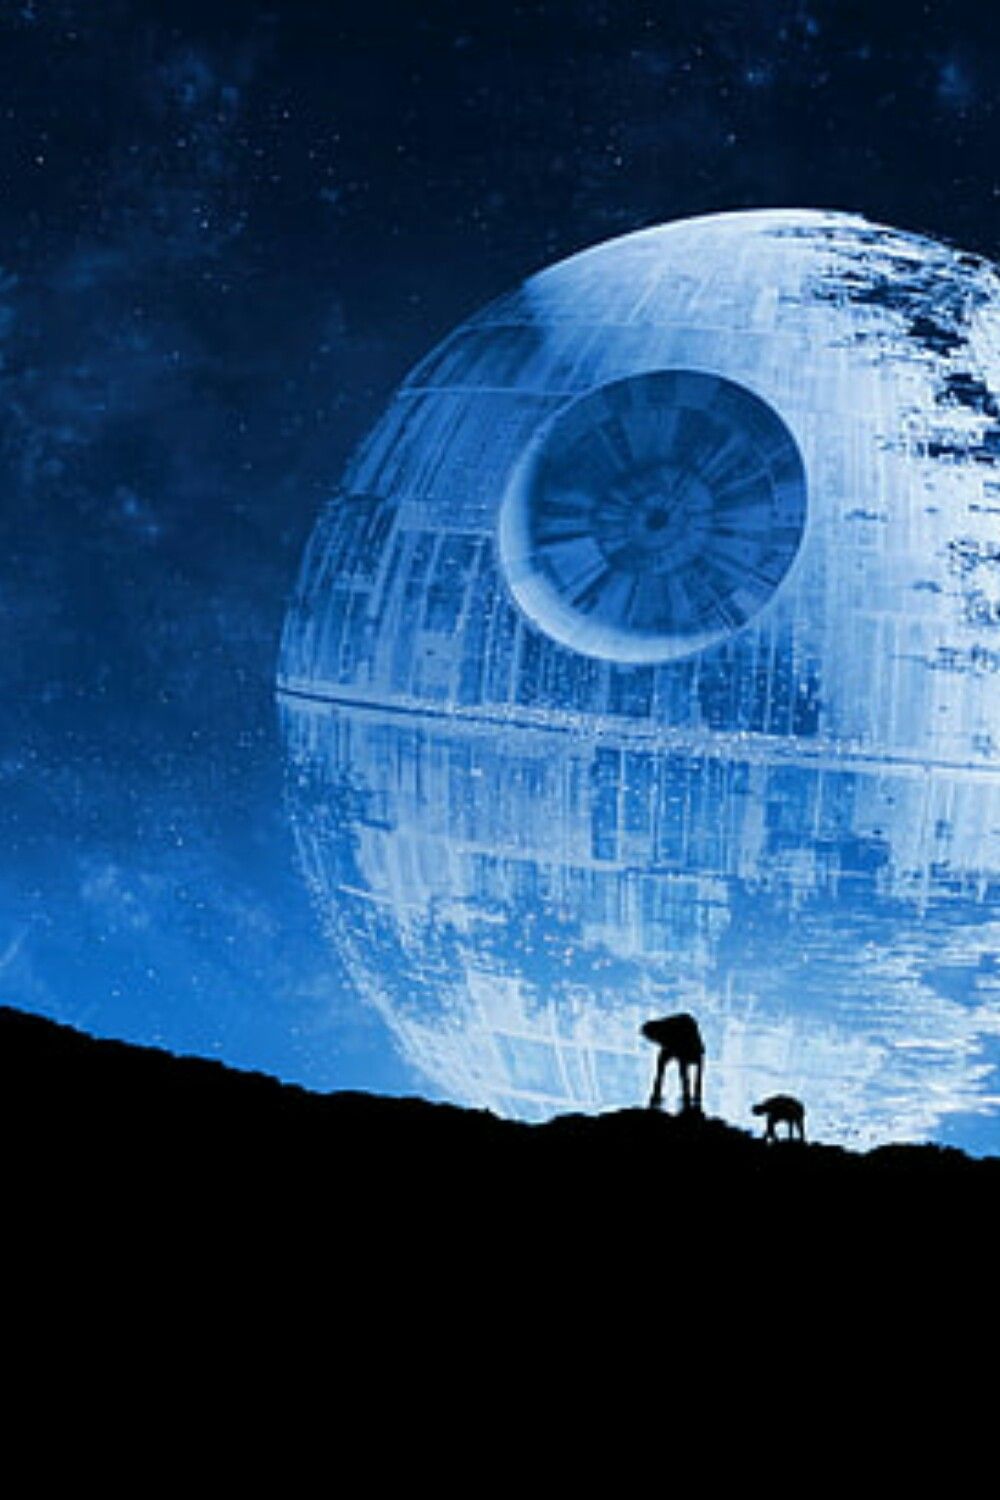 Star Wars wallpaper iphone aesthetic. Star wars picture, Star wars background, Star wars image